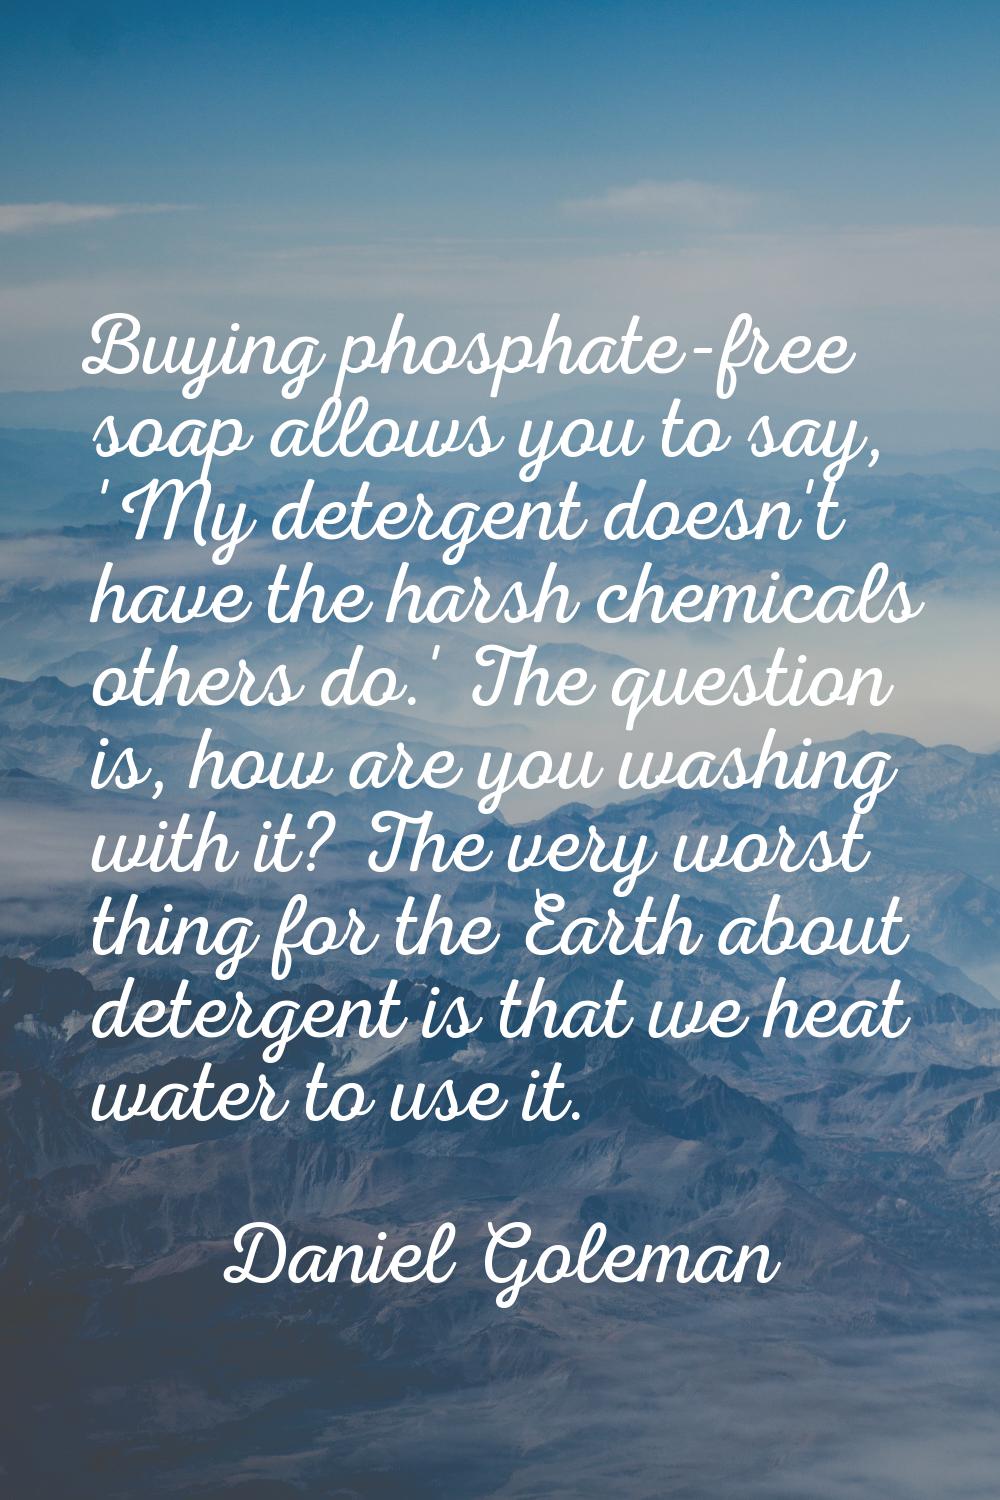 Buying phosphate-free soap allows you to say, 'My detergent doesn't have the harsh chemicals others